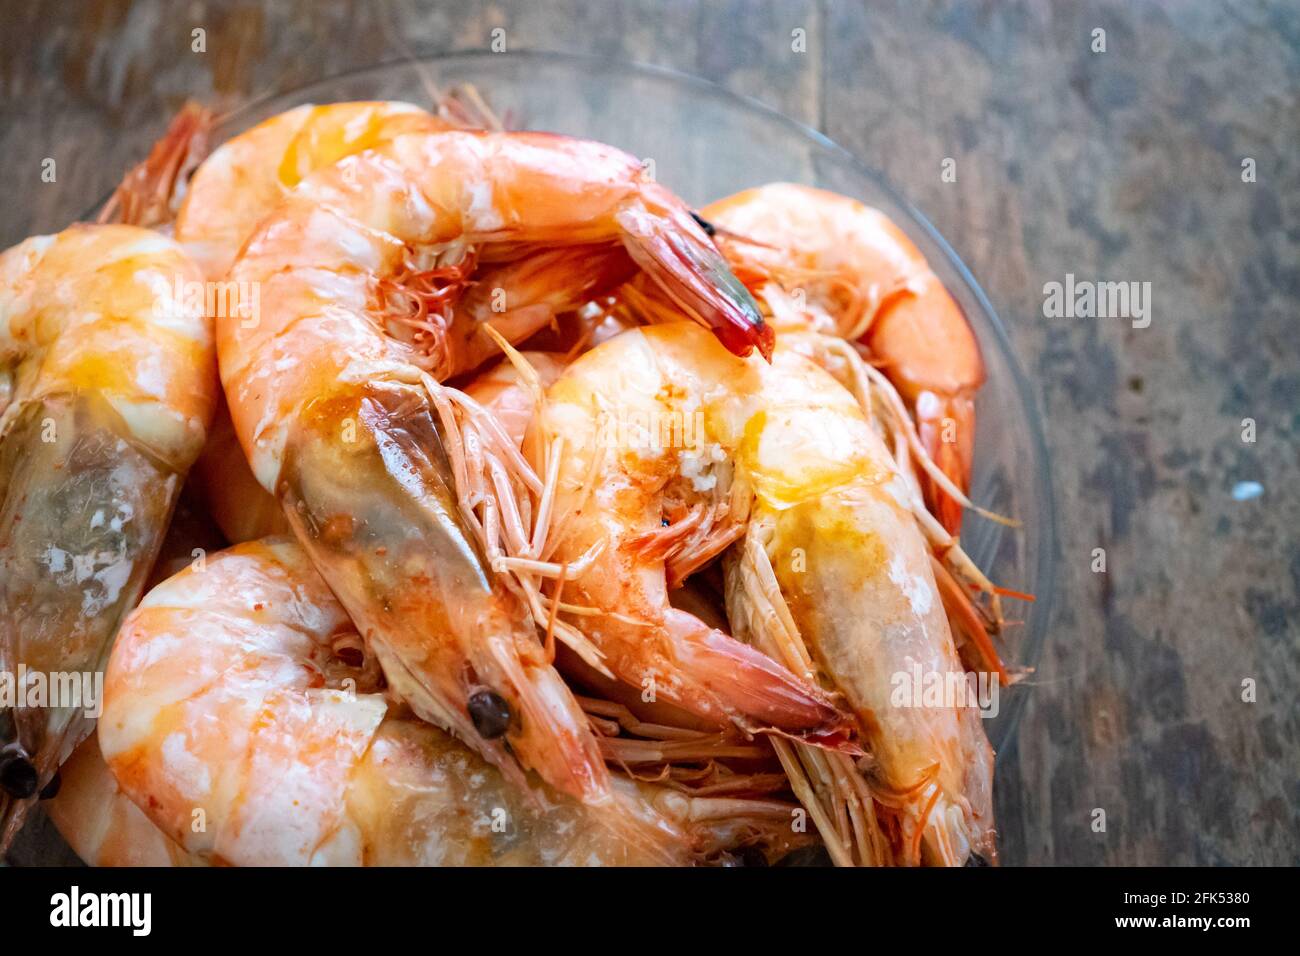 Close up to the Boiled Shrimp in the glass bowl on wooden background. Stock Photo